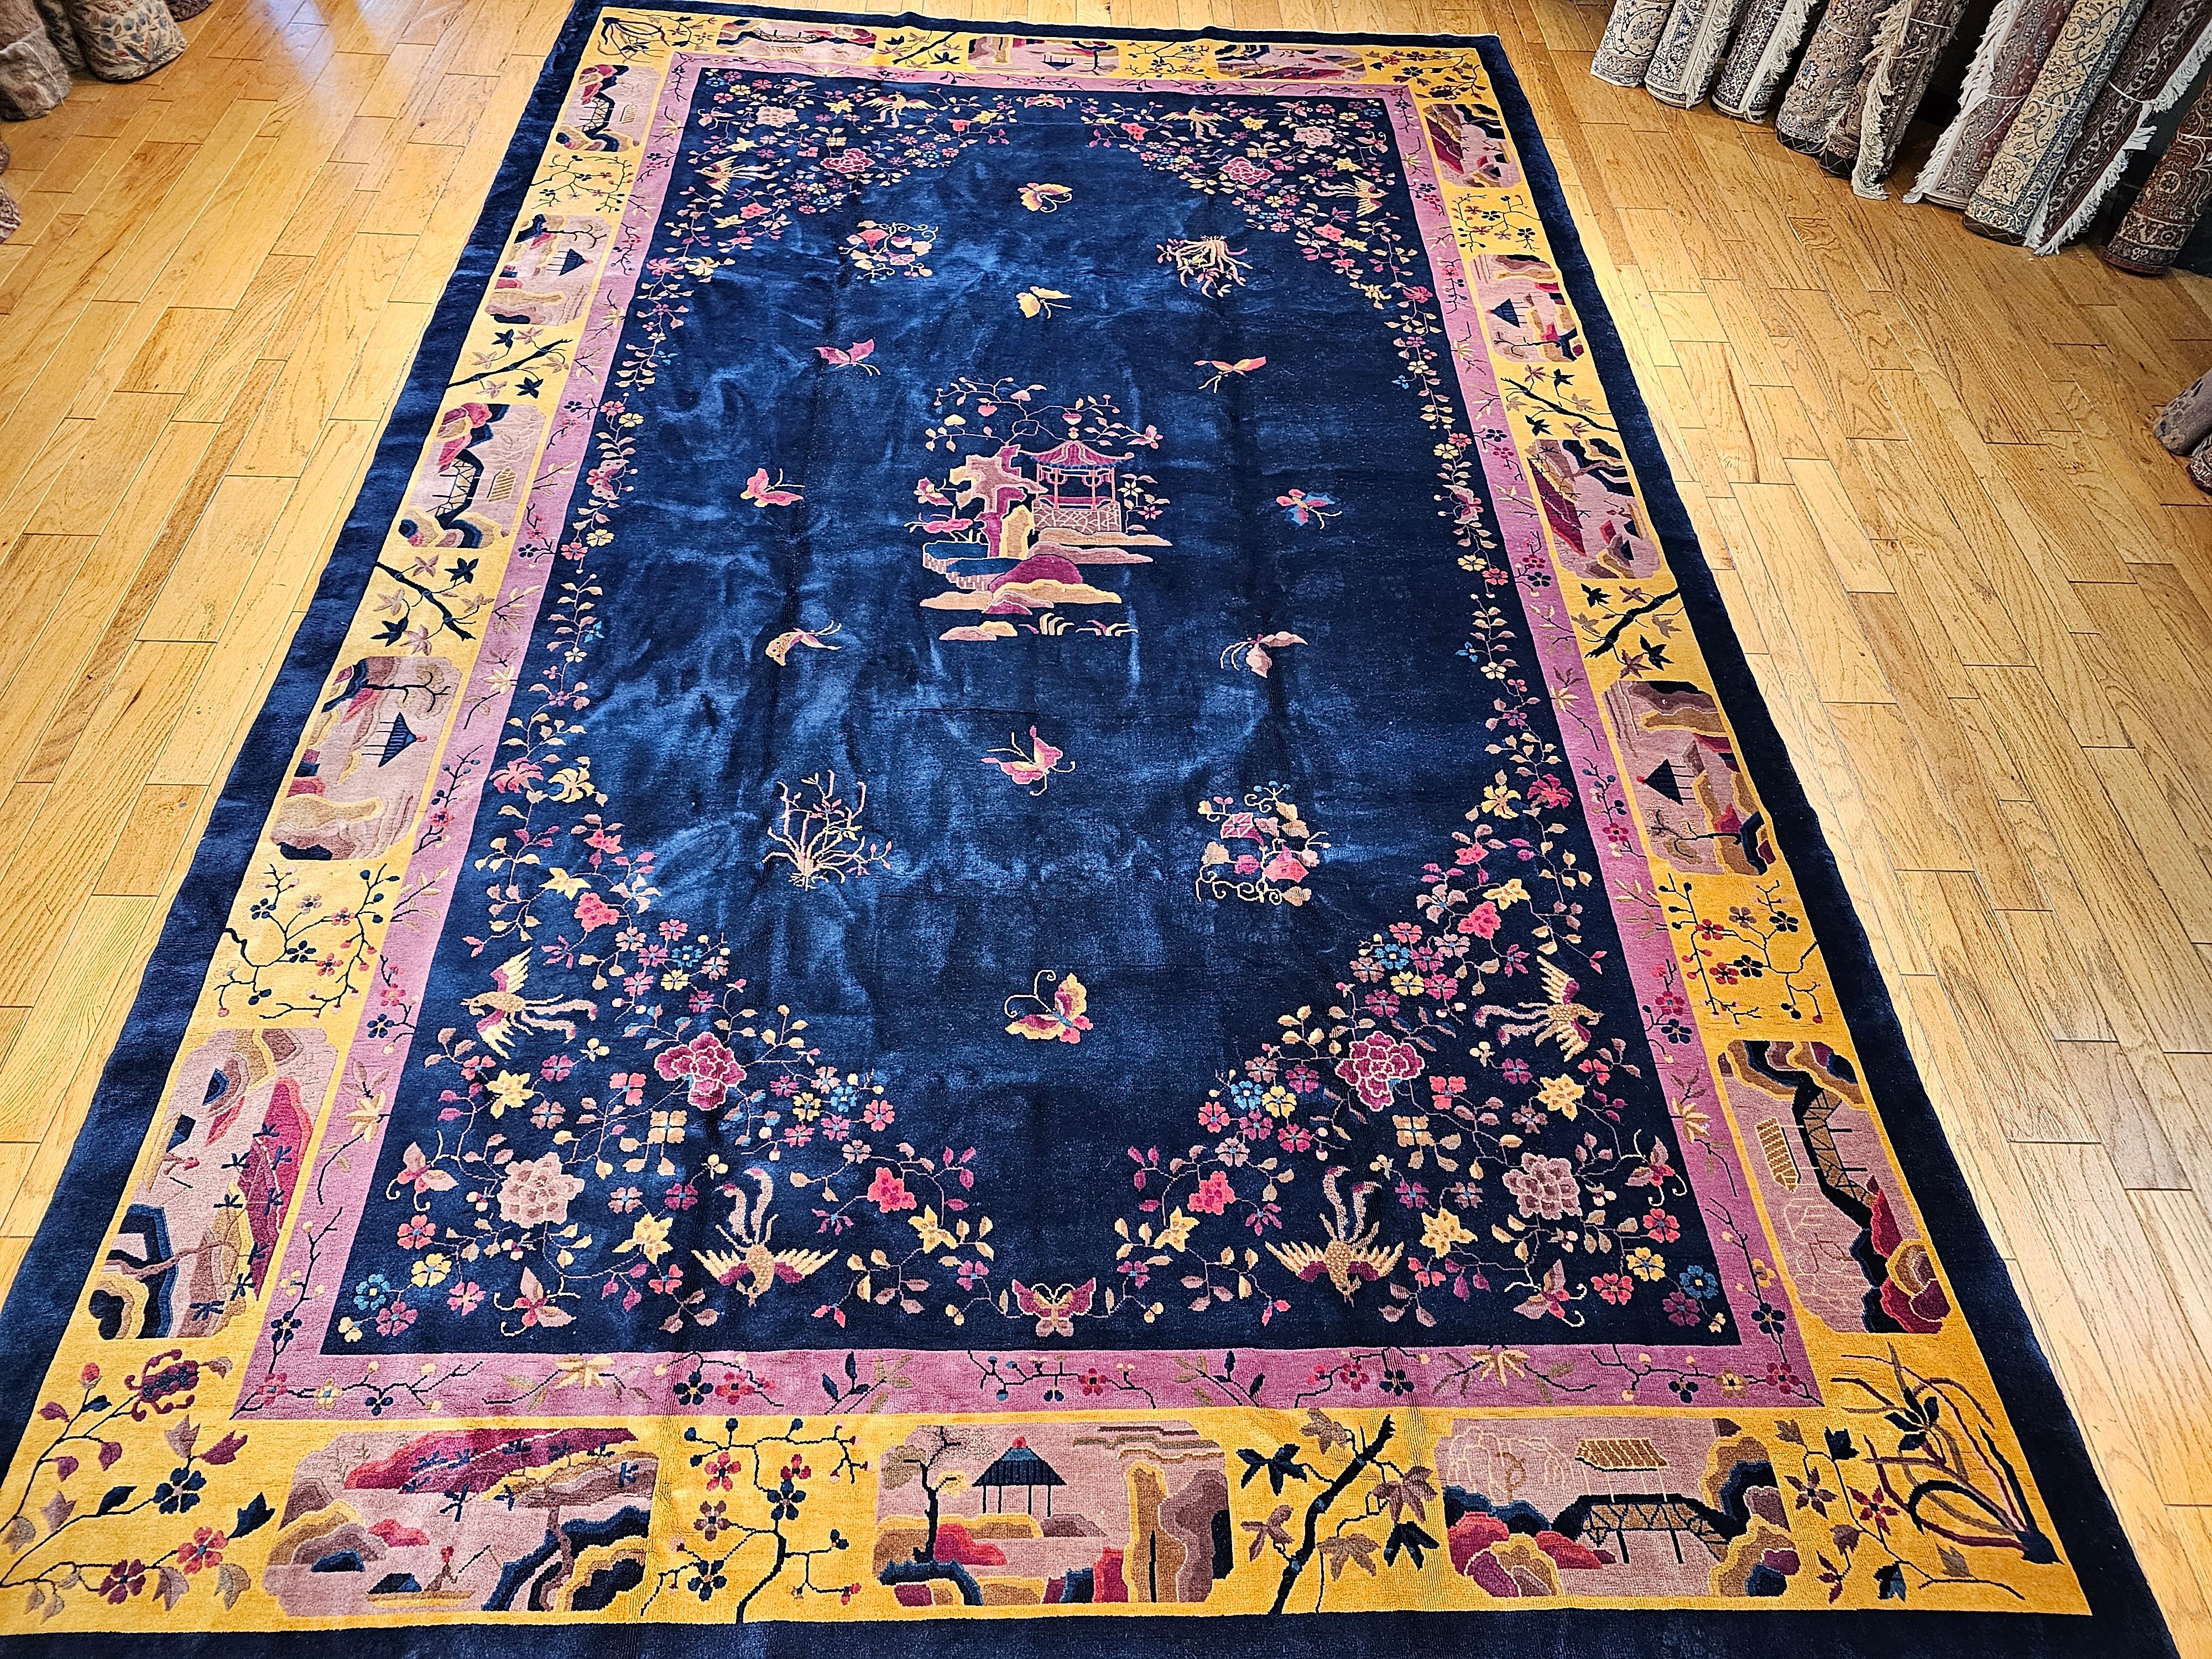 A magnificent example of oversized Walter Nichols Art Deco Chinese rug from the early 20th century.  ! Truly one of the most beautiful rugs ever made in China in a wonderful “like new” condition which is extremely rare for a rug over 100 years old.